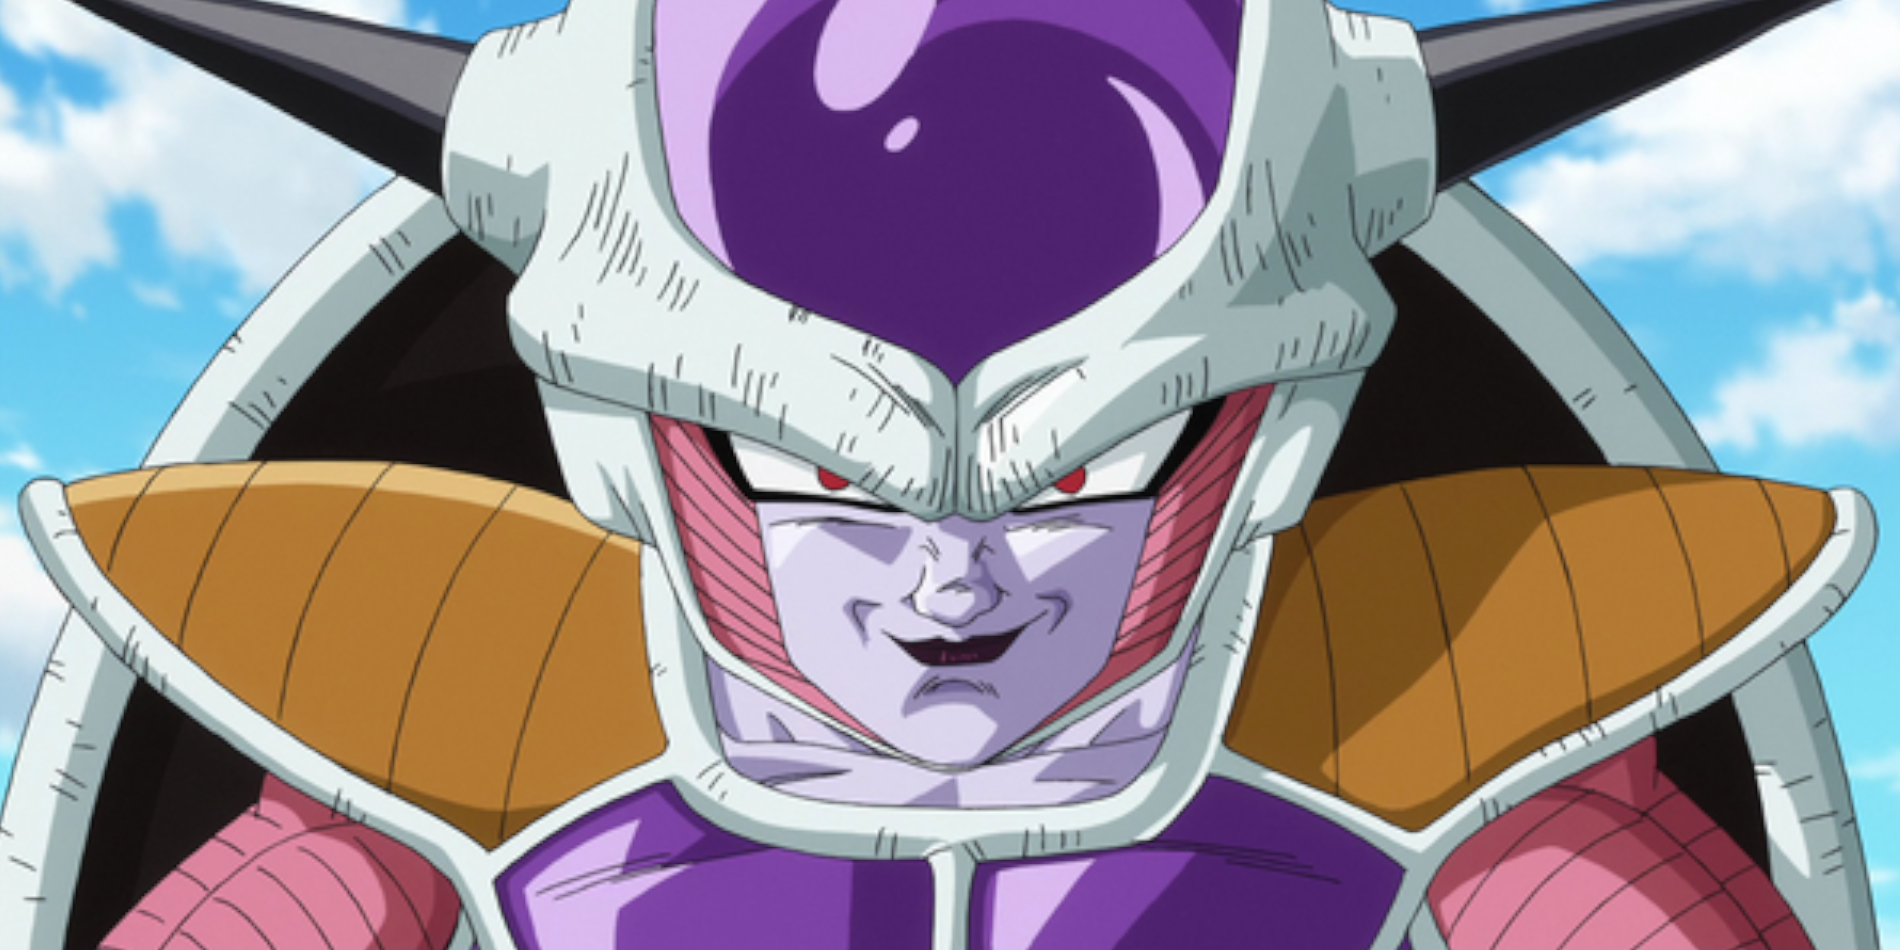 Frieza is shown in his 1st Form in Dragon Ball.